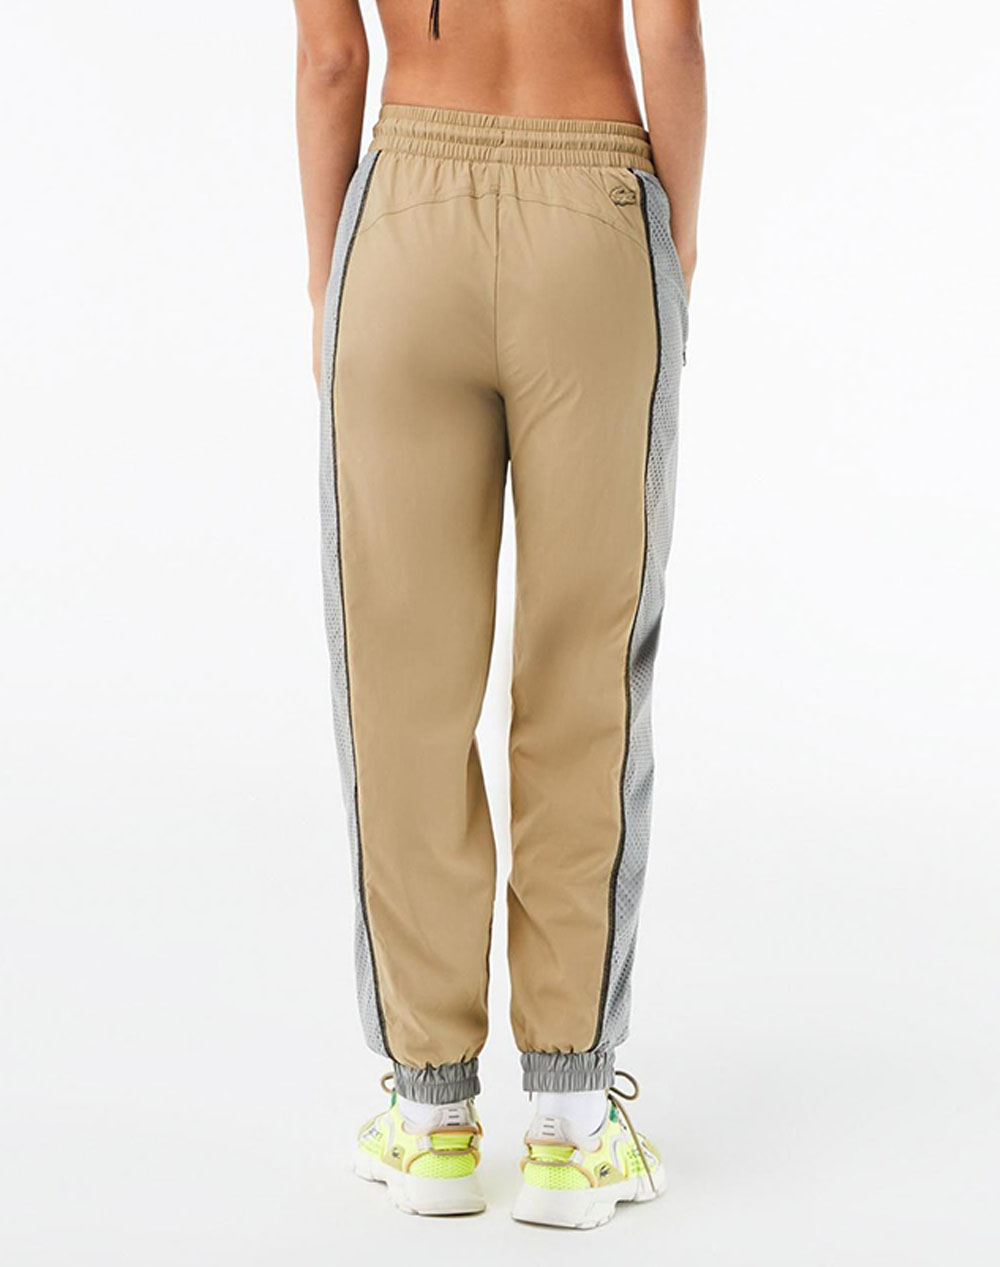 Buy Lacoste Trousers online  Men  47 products  FASHIOLAin